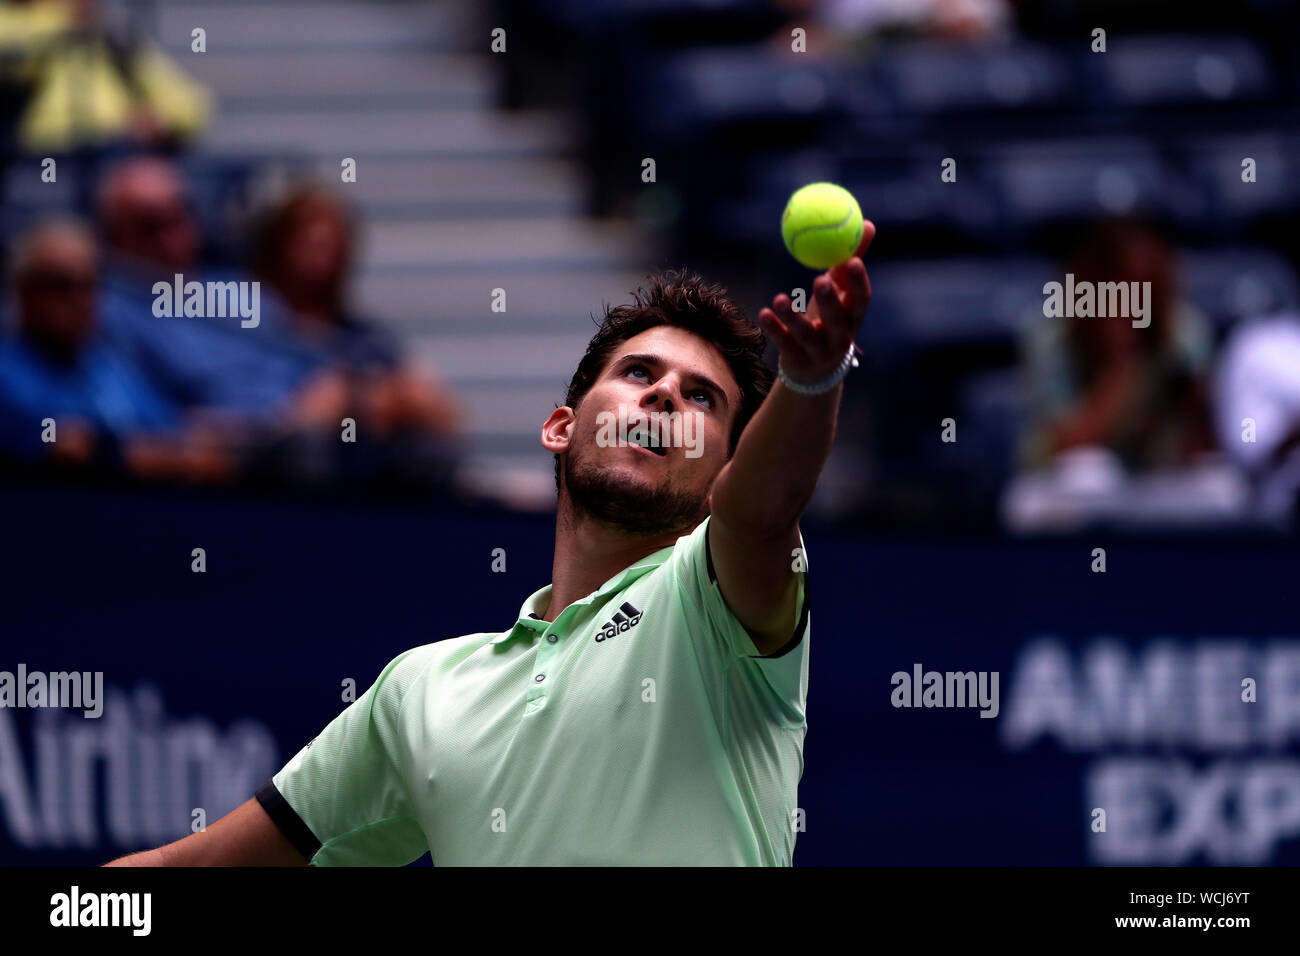 Flushing Meadows, New York, United States. 27th Aug, 2019. Dominic Thiem of Austria serving to Thomas Fabbiano Italy during their first round match at the US Open in Flushing Meadows, New York. Fabiano won the match in four sets. Credit: Adam Stoltman/Alamy Live News Credit: Adam Stoltman/Alamy Live News Stock Photo